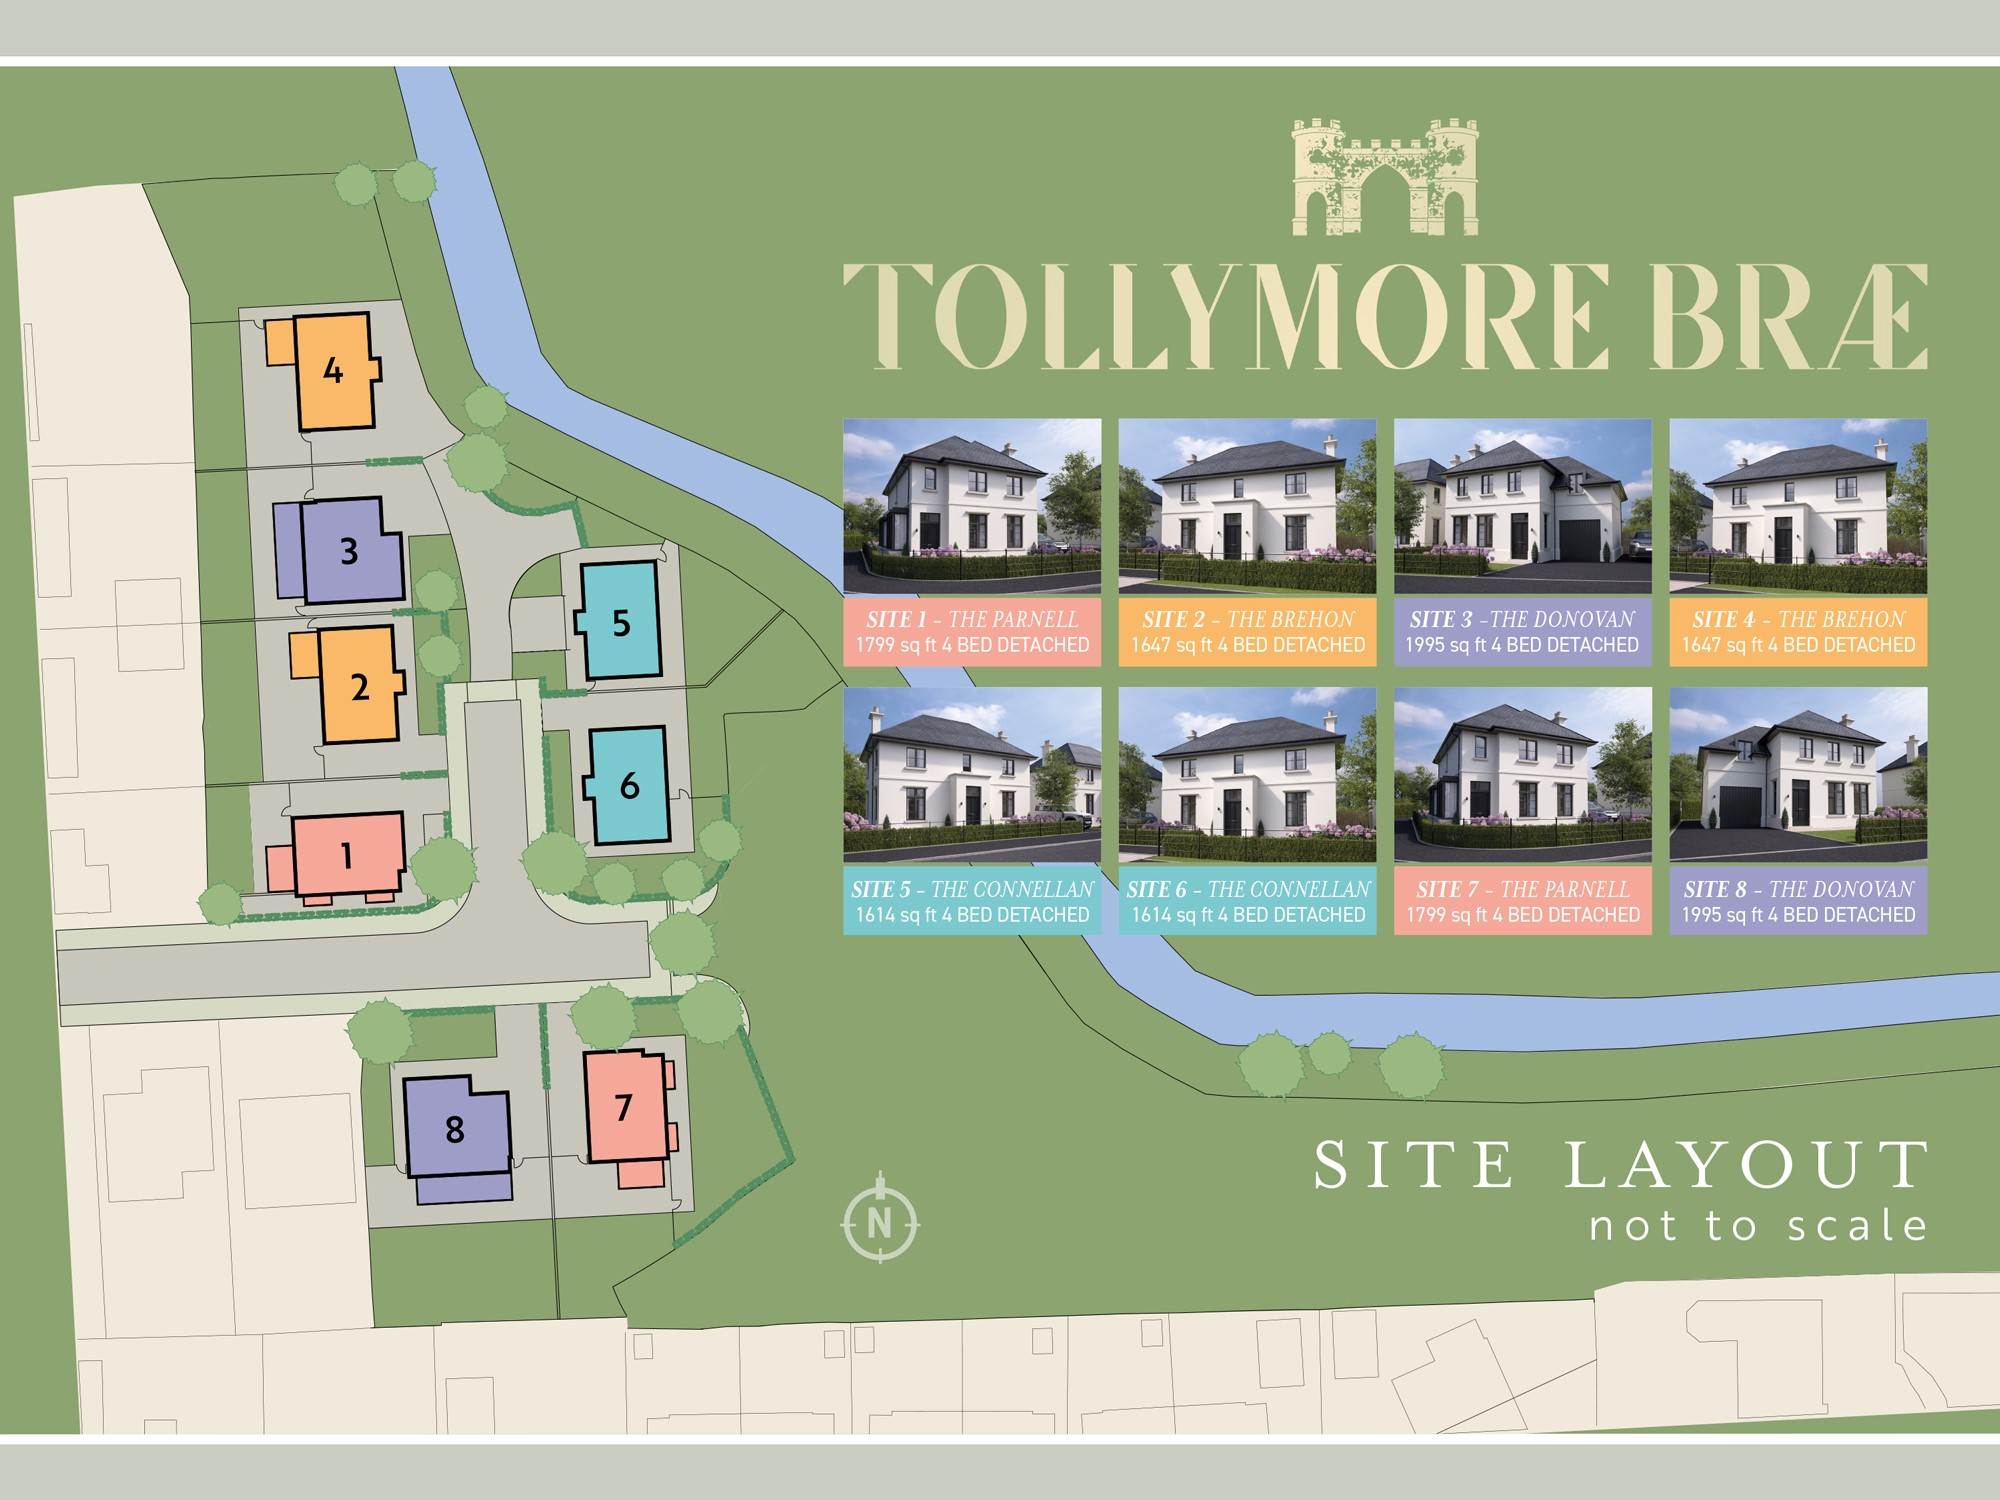 Site 1 Tollymore Brae